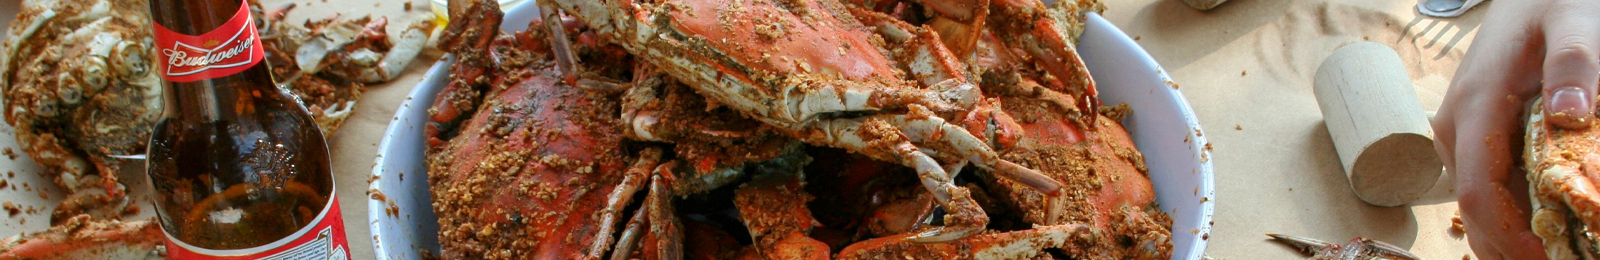 Crab Happy on the Bay: New Dock & Dines